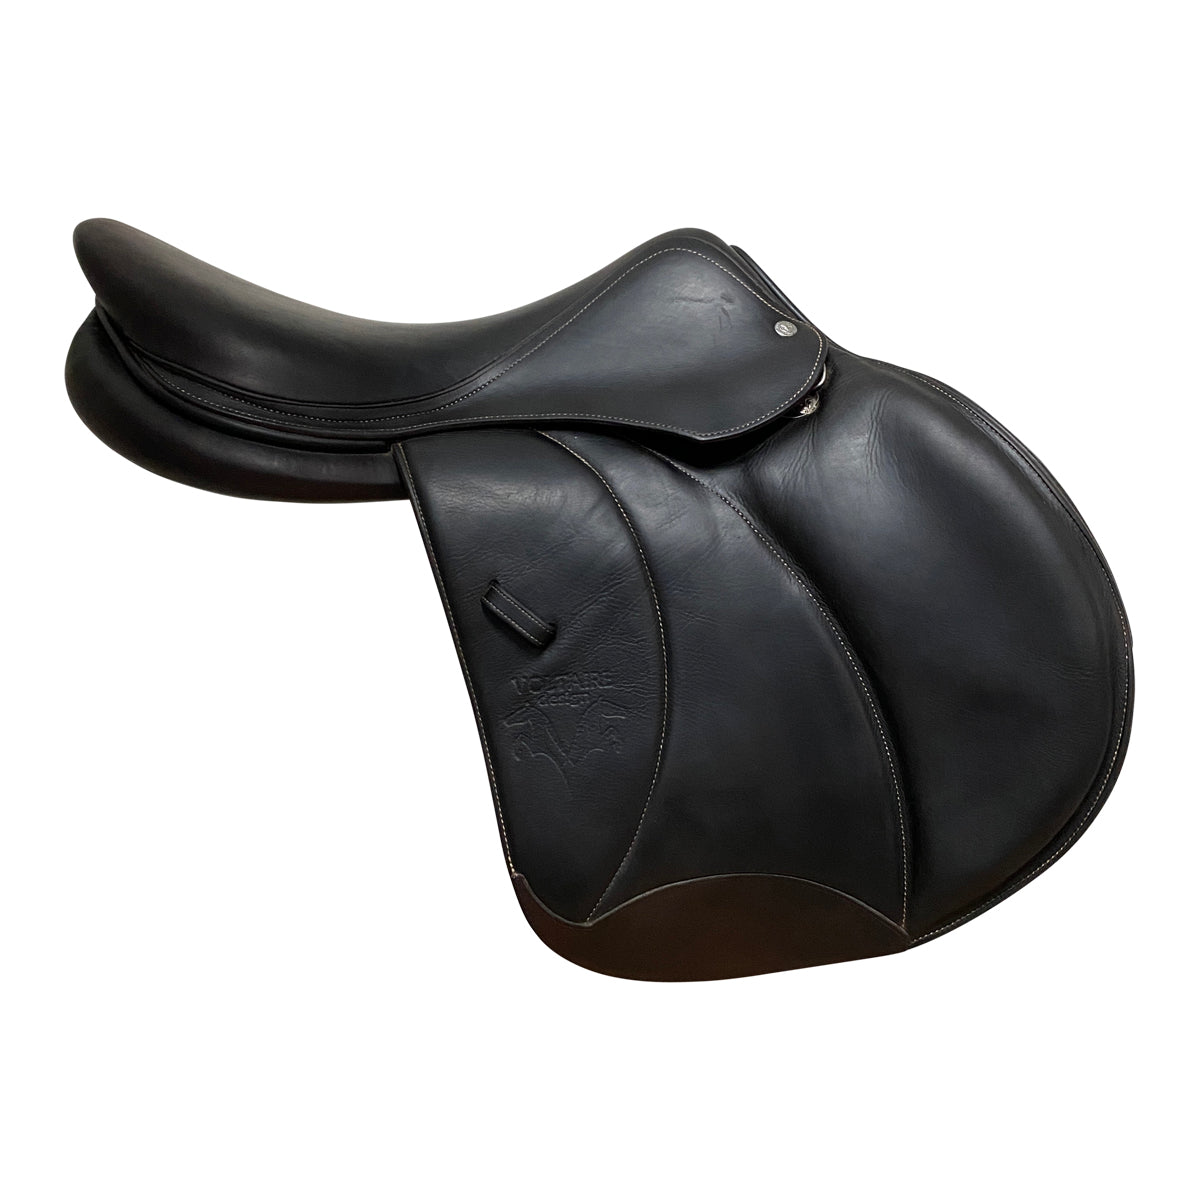 Voltaire 2018 Palm Beach Saddle in Brown